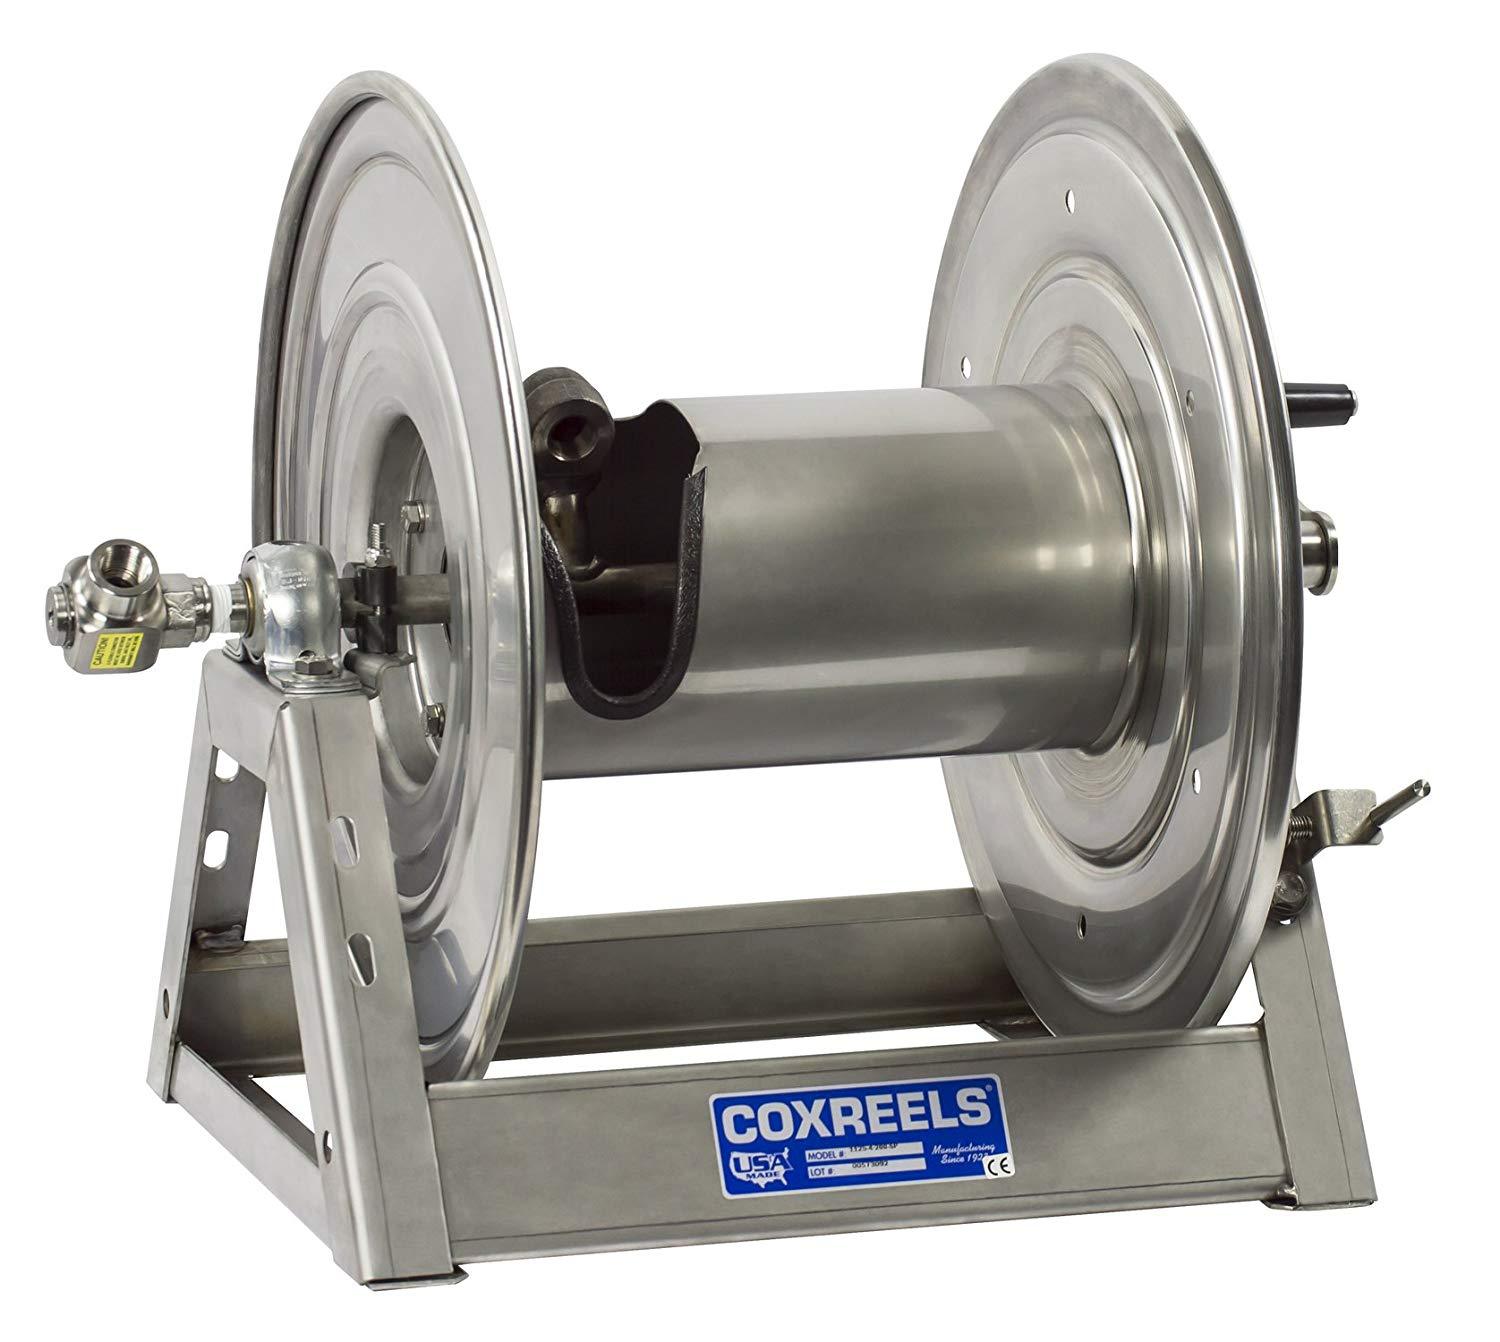 1125-5-100-SP : Coxreels 1125-5-100-SP Stainless Steel Hand Crank Hose  Reel, 3/4 ID, 100' capacity, NO HOSE, 3000psi